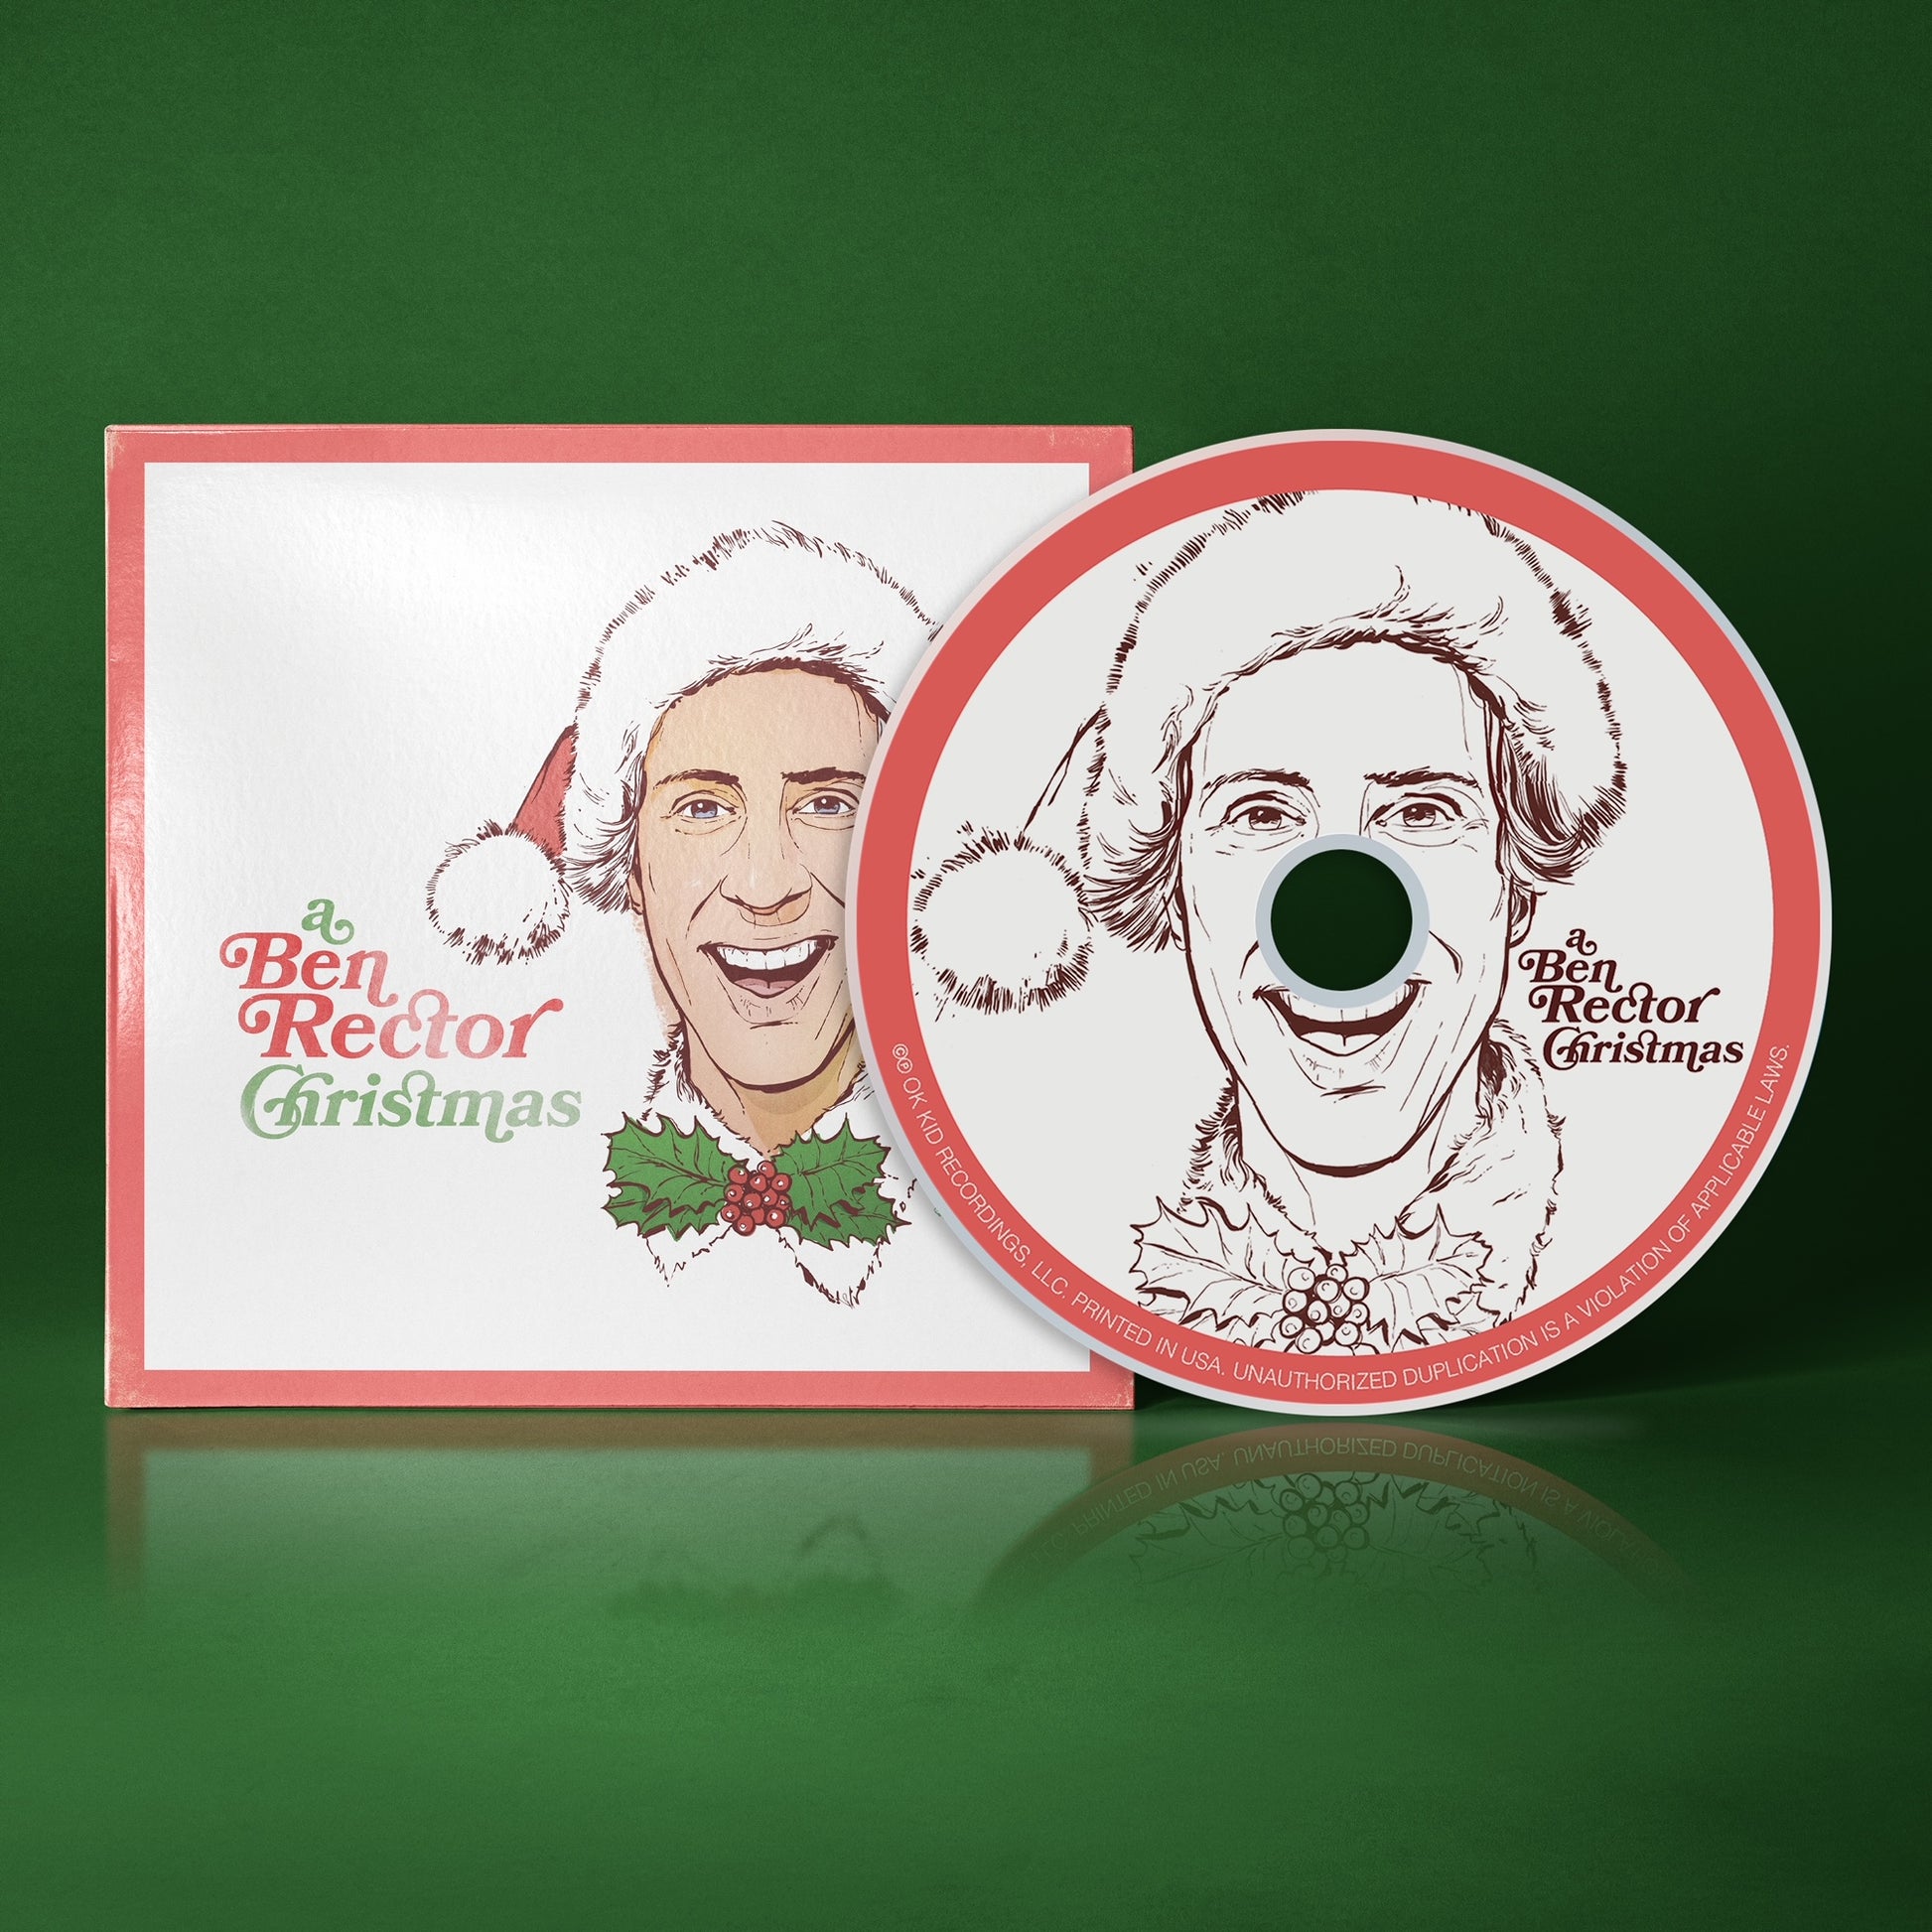 Limited Edition CD - Ben Rector Online Store - Music